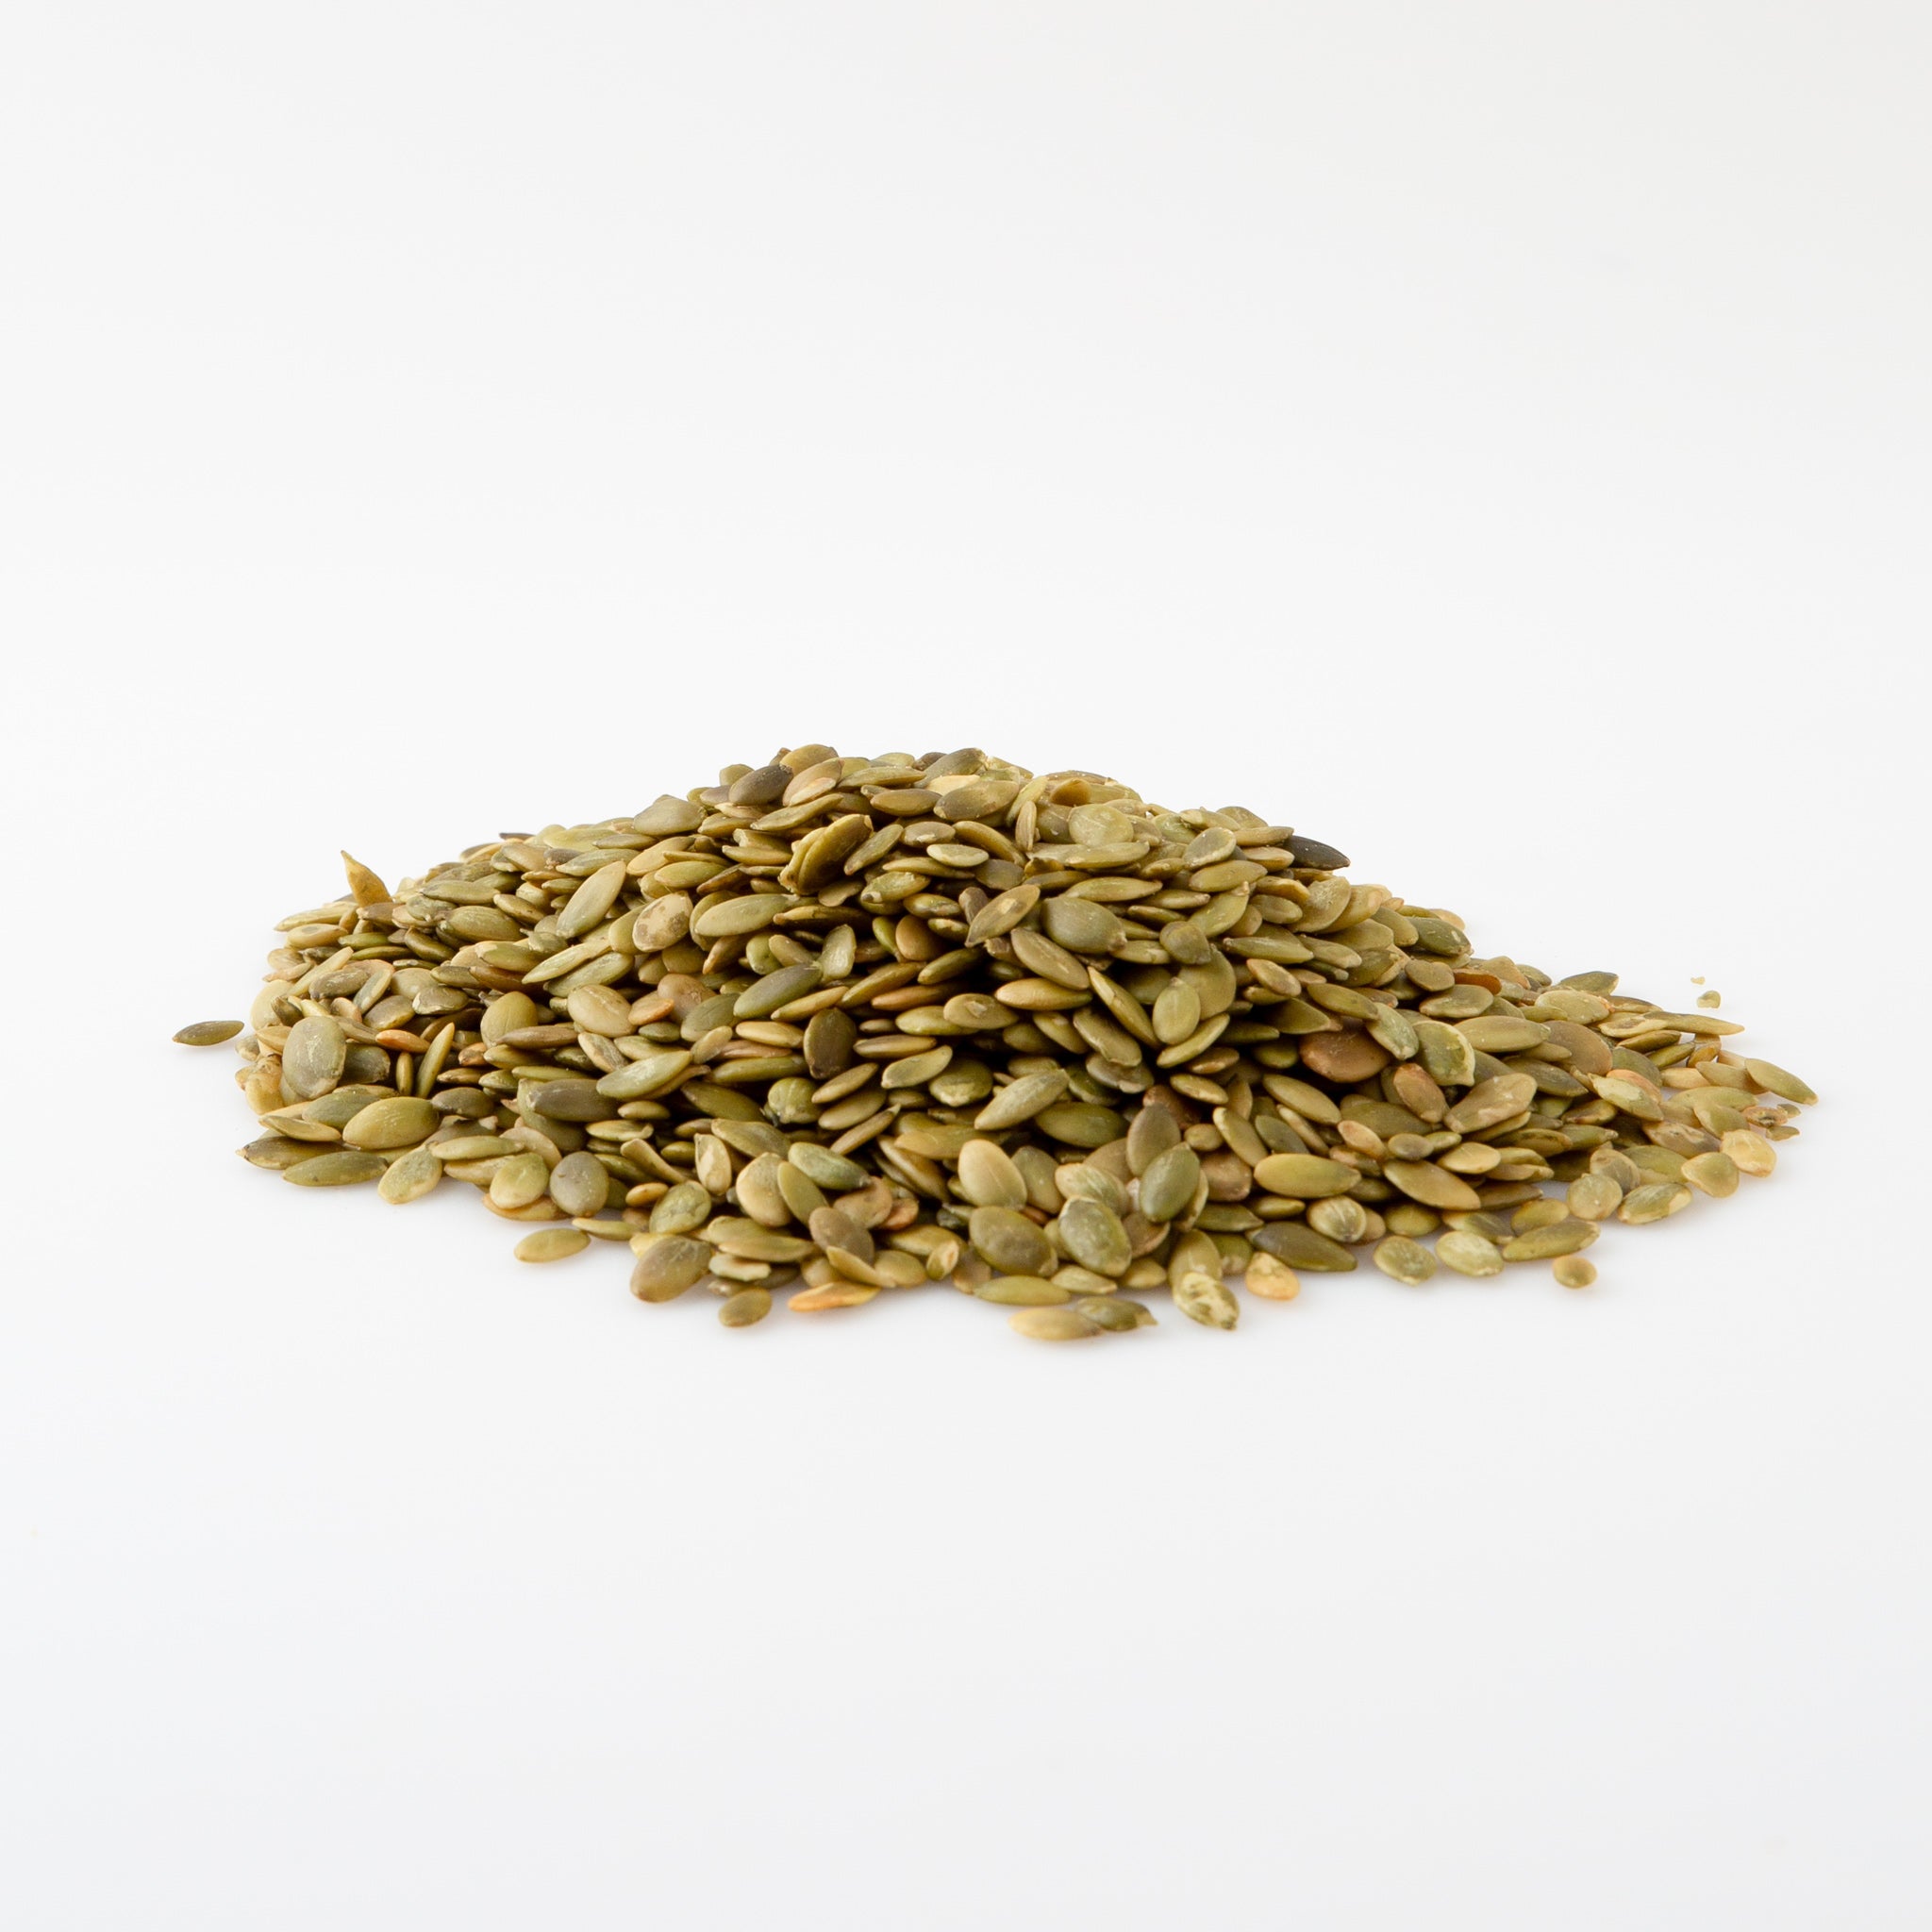 A heap of Organic Pepitas (Seeds) in white background - Naked Foods